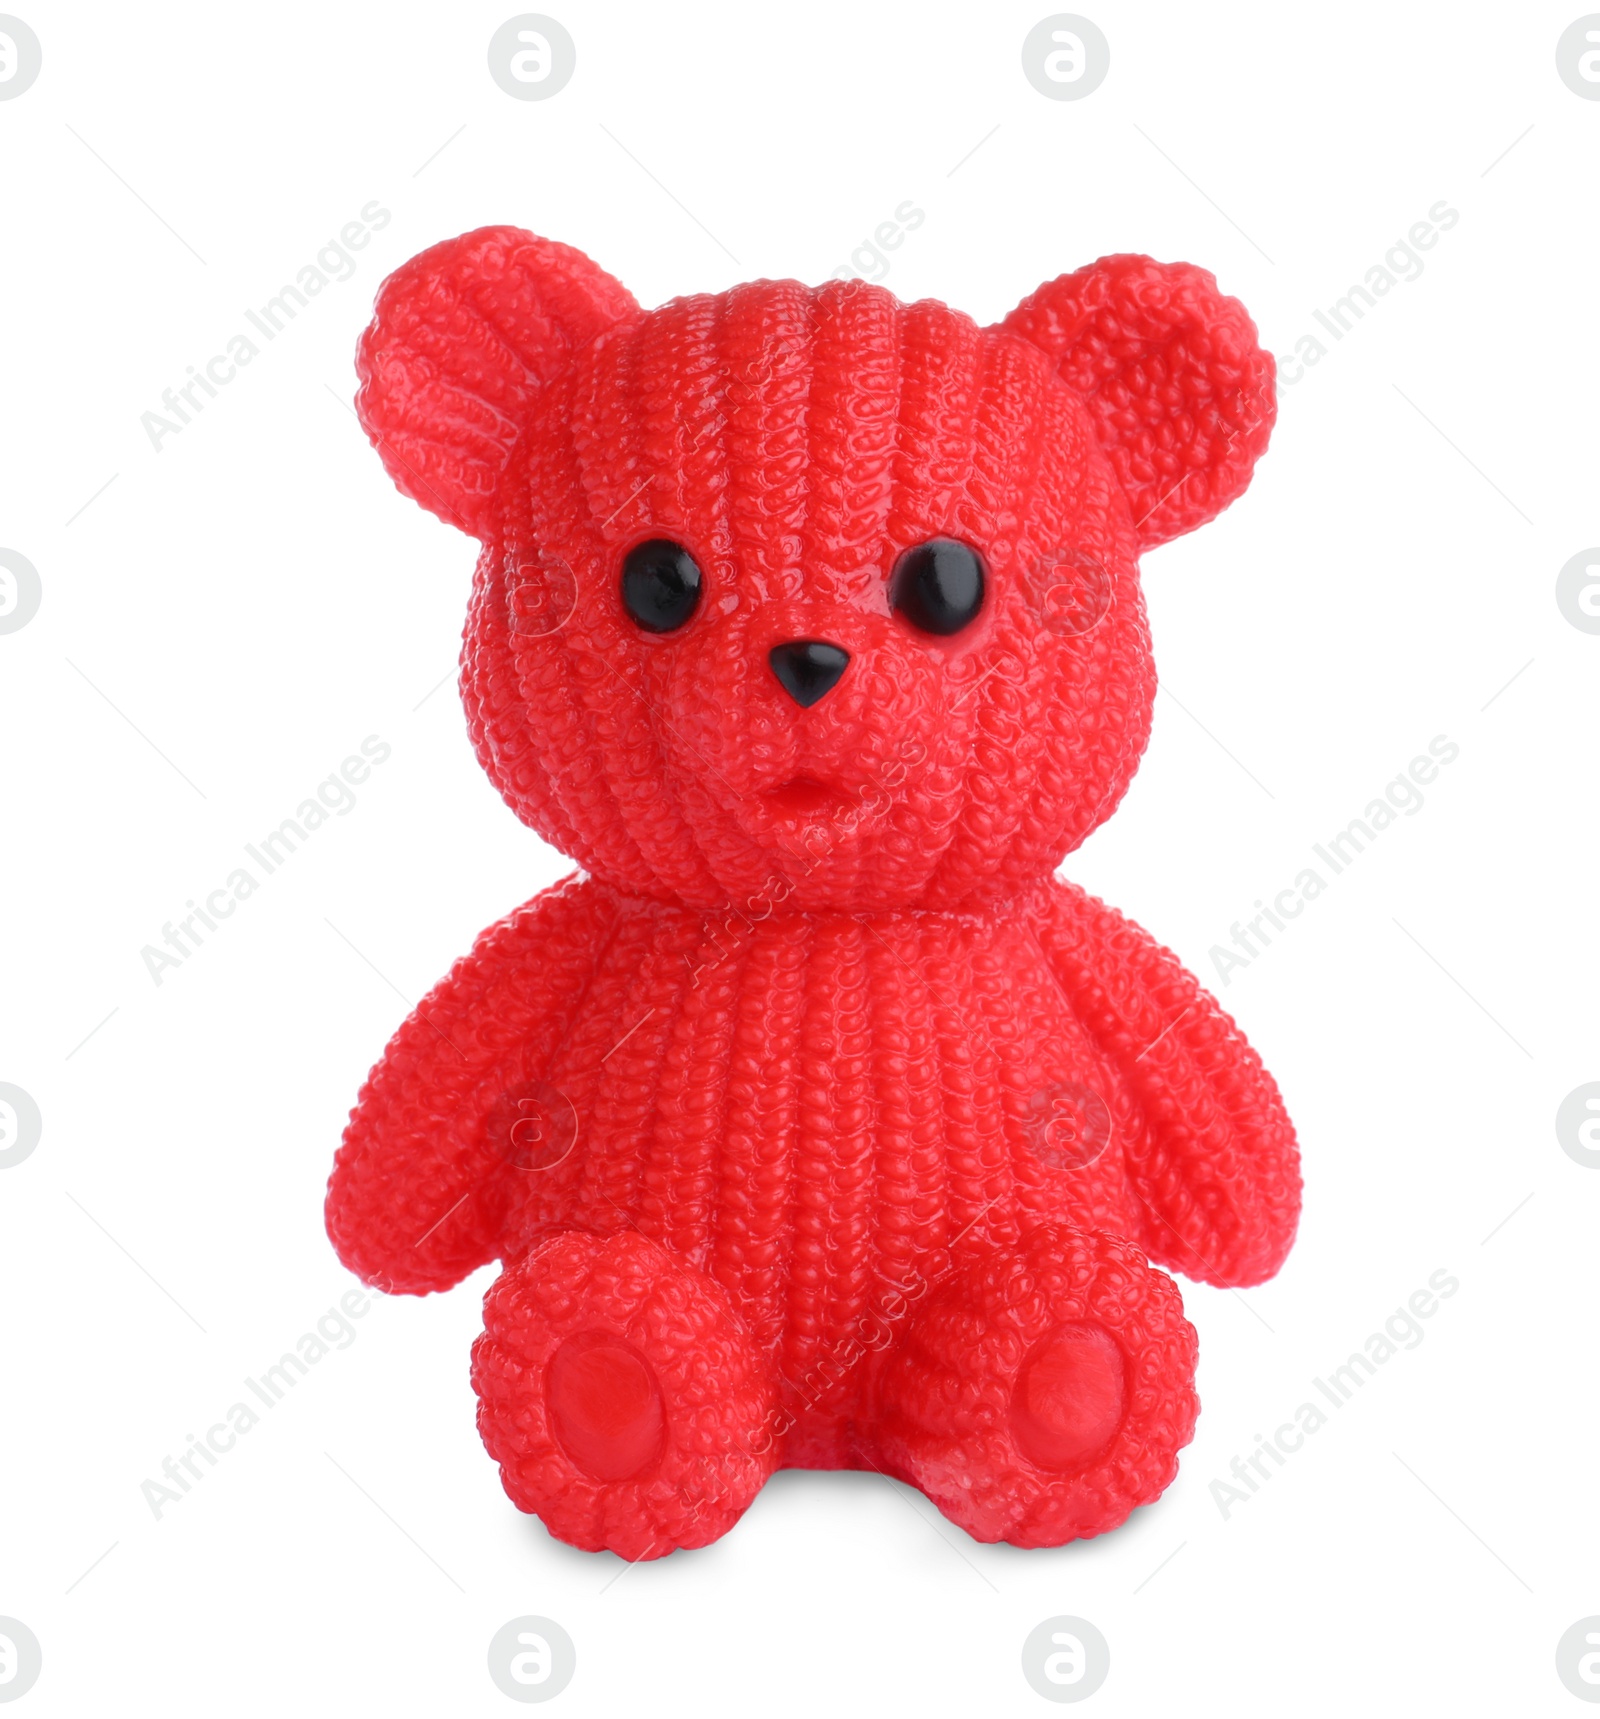 Photo of Adorable red toy bear isolated on white